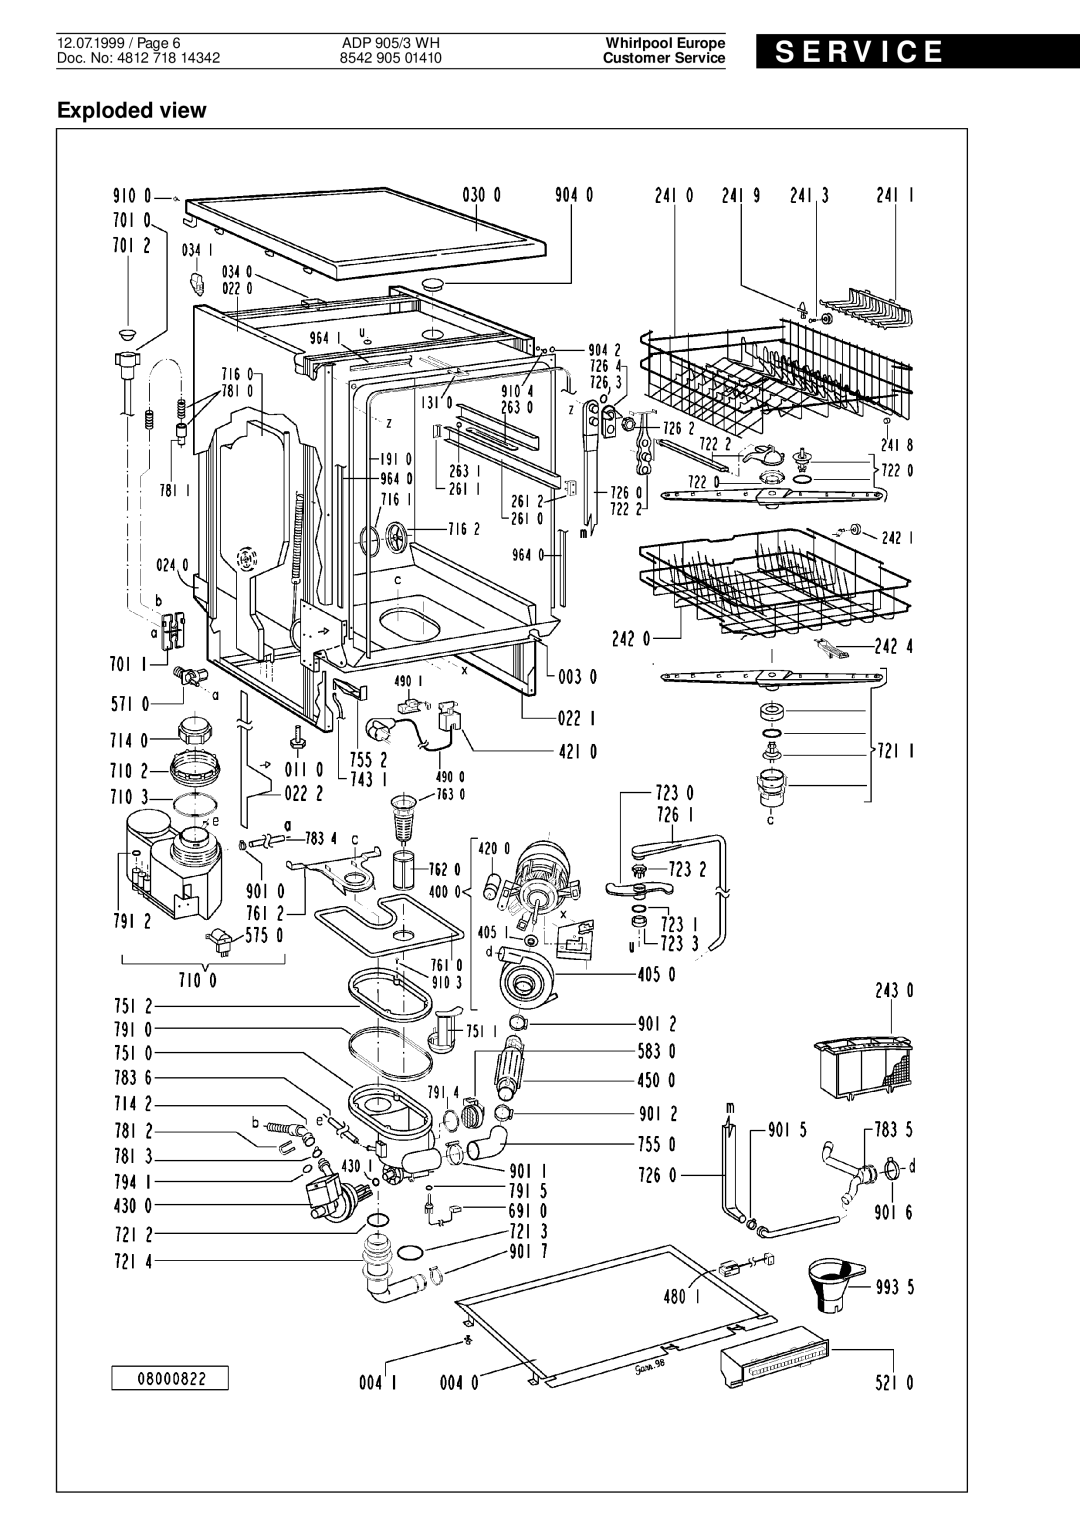 Whirlpool ADP 905/3 WH service manual Exploded view, S E R V I C E, Whirlpool Europe, Customer Service 